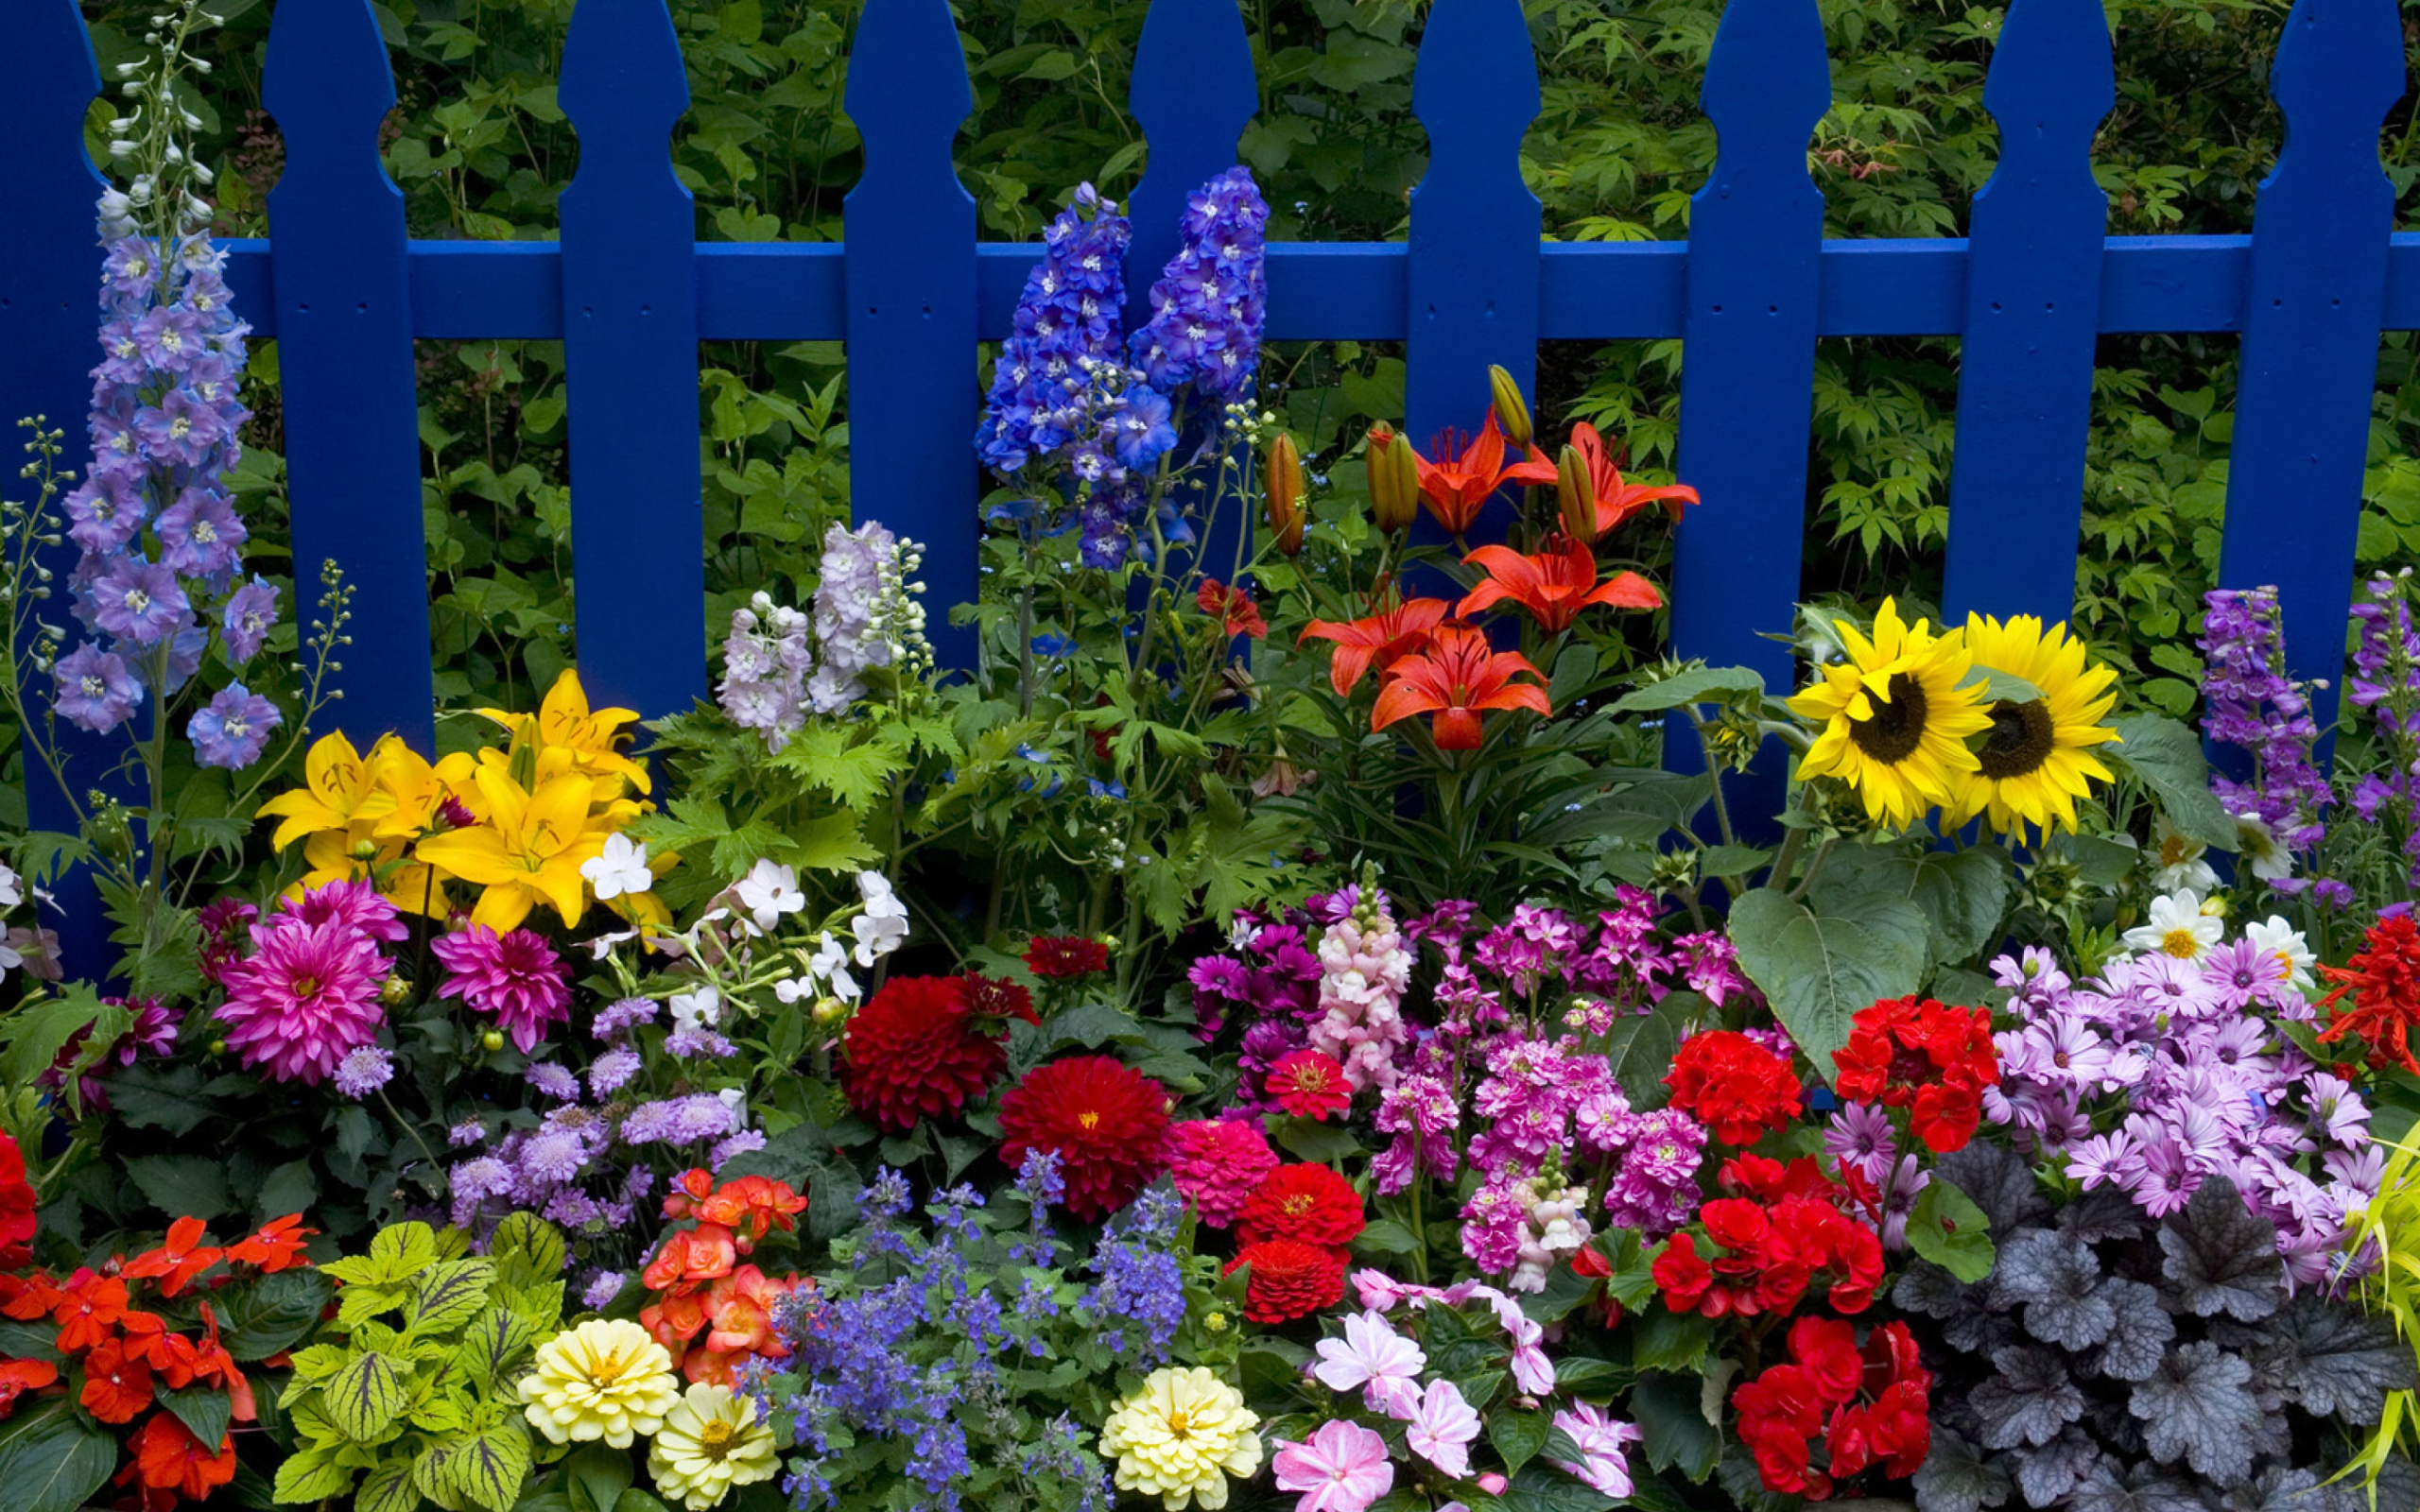 Garden Flowers In Front Of Bright Blue Fence wallpaper 2560x1600